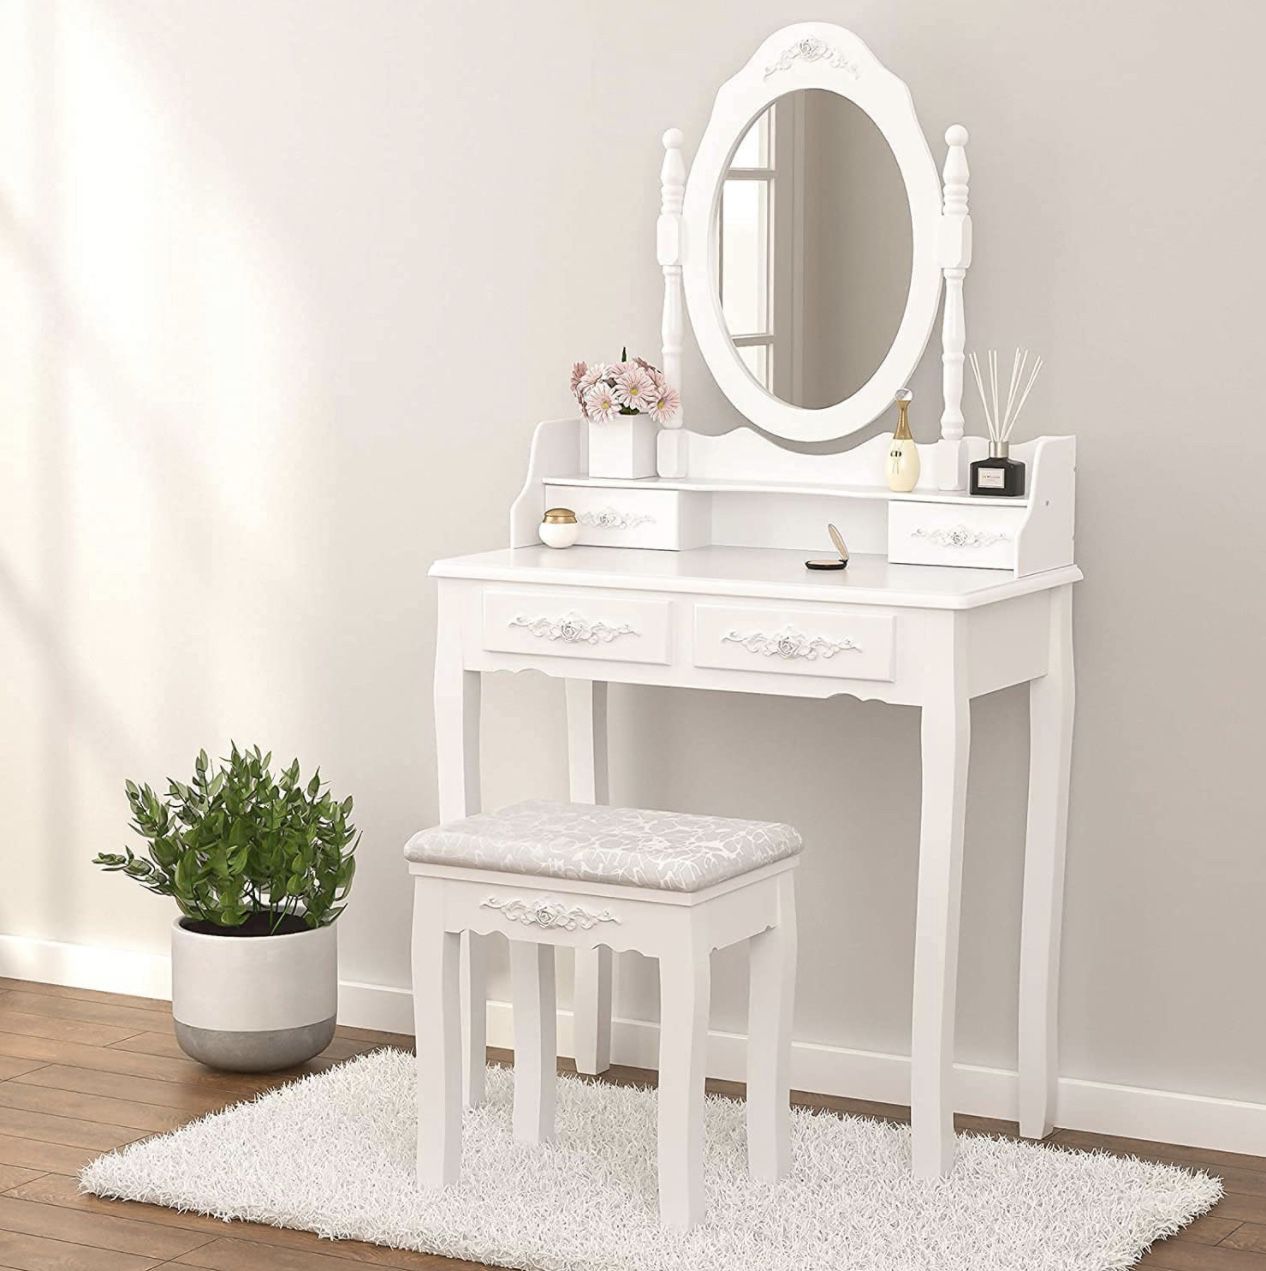 Makeup Vanity Set With Mirror And Tool. 